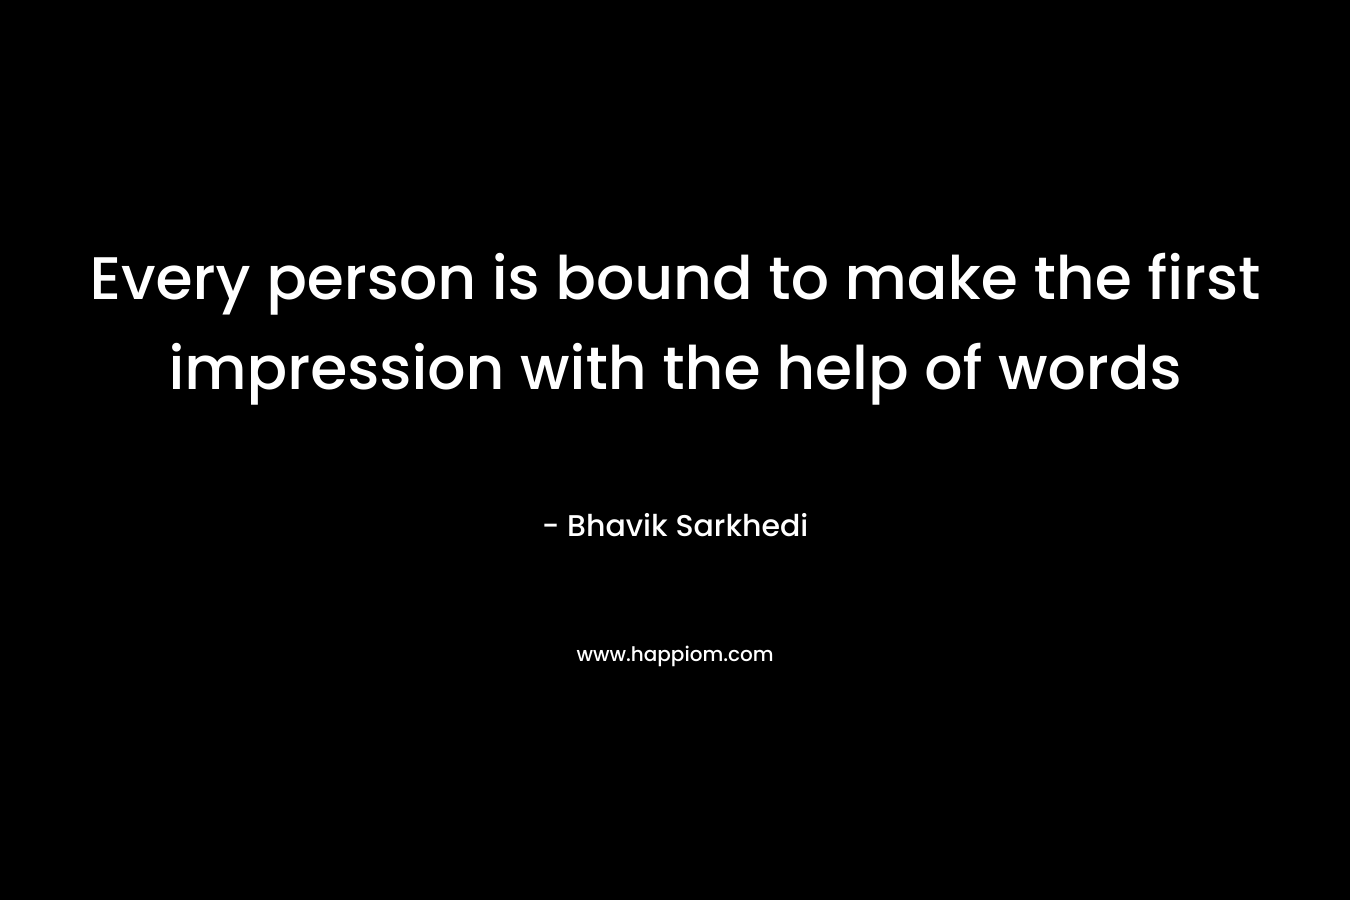 Every person is bound to make the first impression with the help of words – Bhavik Sarkhedi